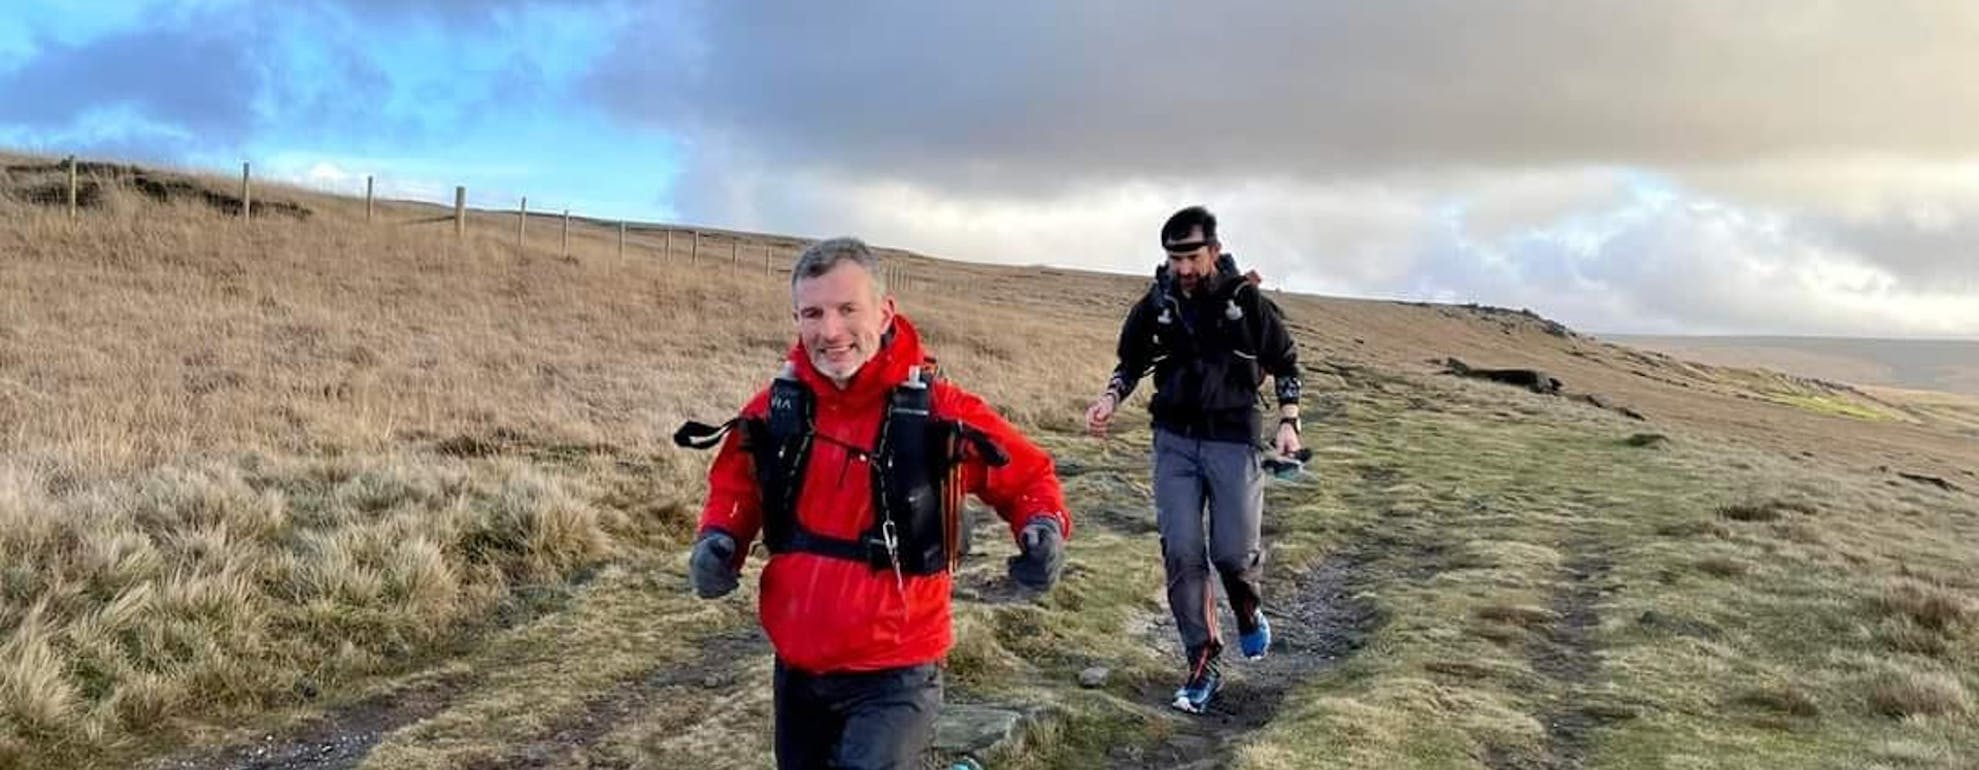 the-montane-spine-race-dougie-zinis